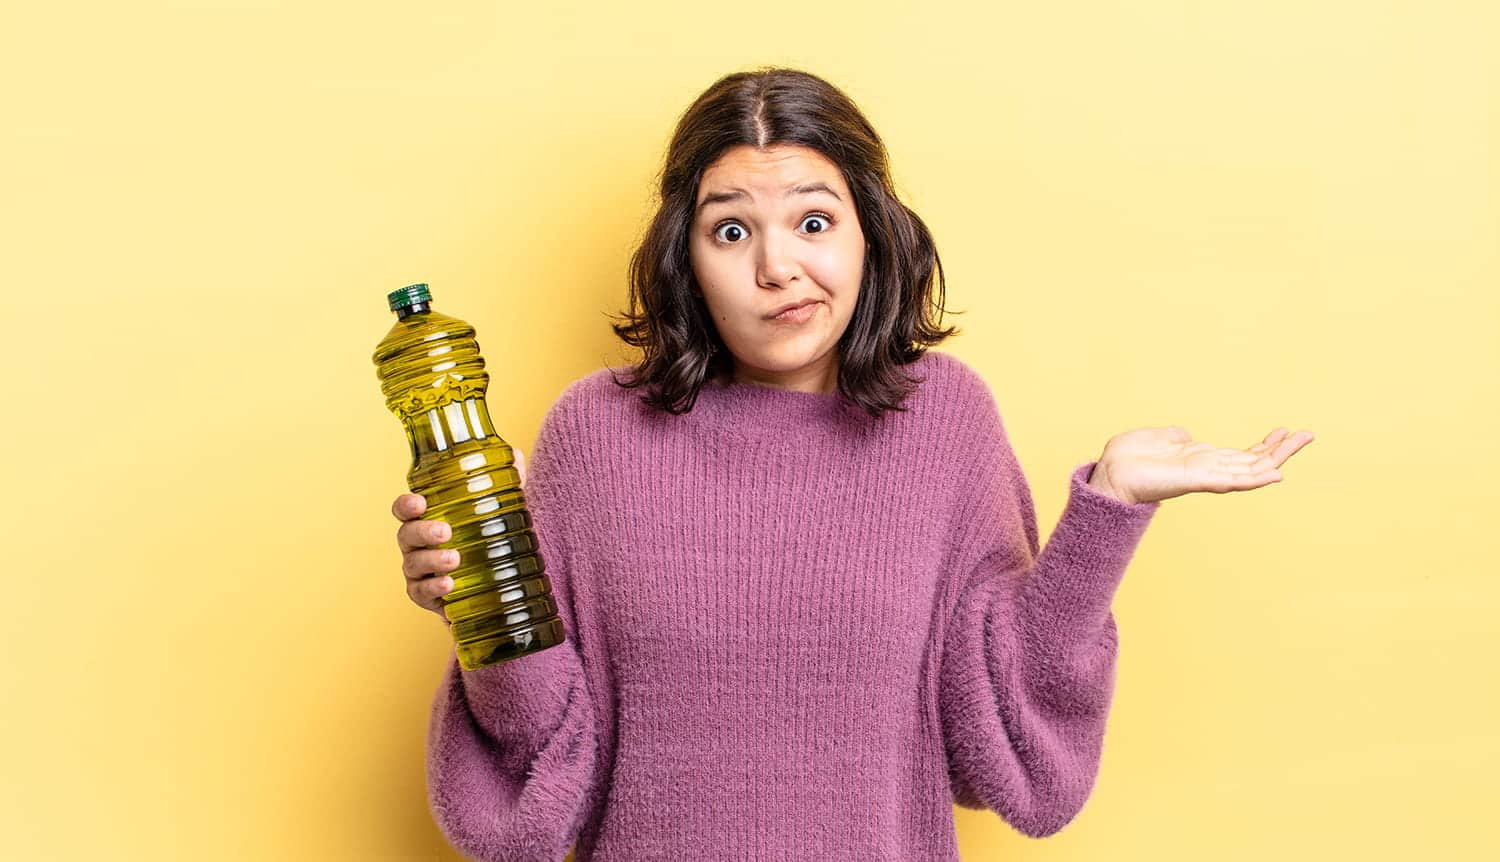 woman confused about what label size fits her bottle